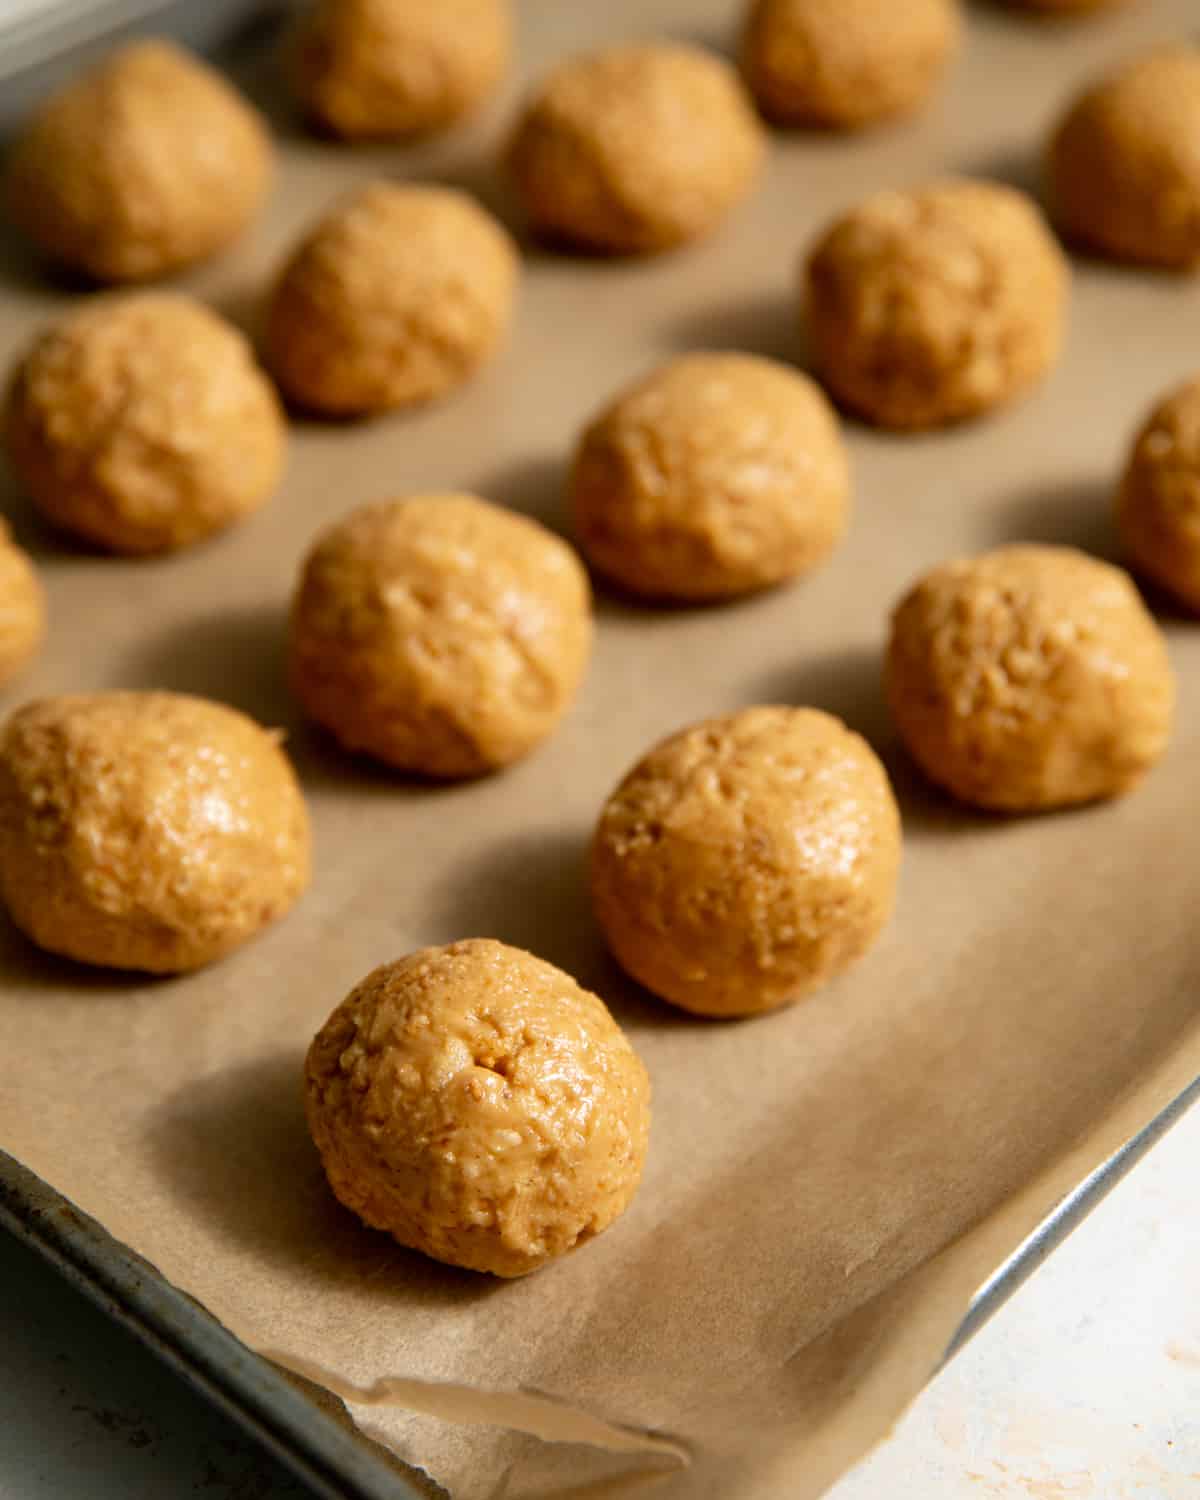 Peanut butter truffle filling in balls on a parchment lined sheet pan.